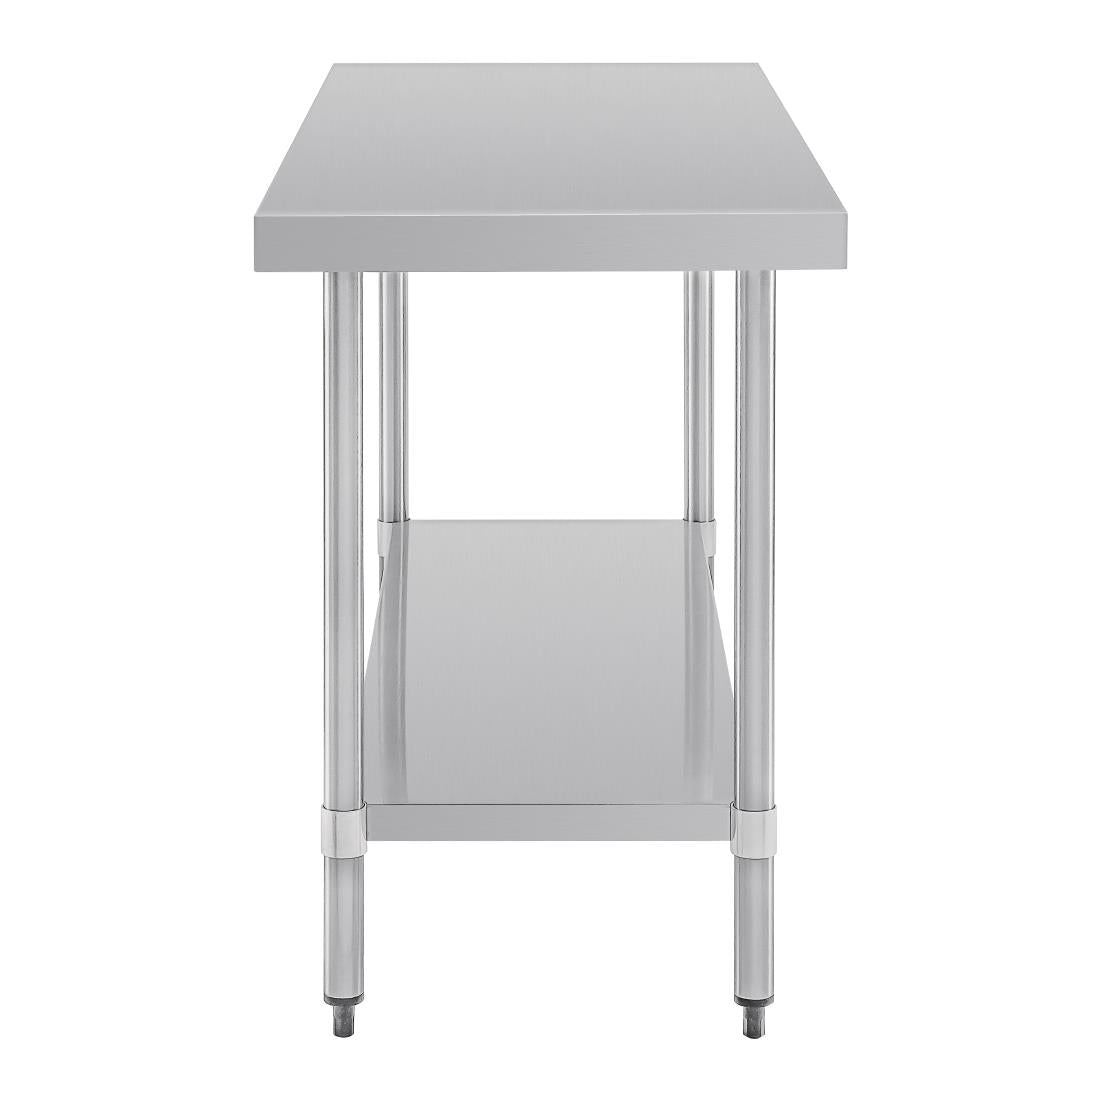 Vogue Stainless Steel Prep Table 1500mm